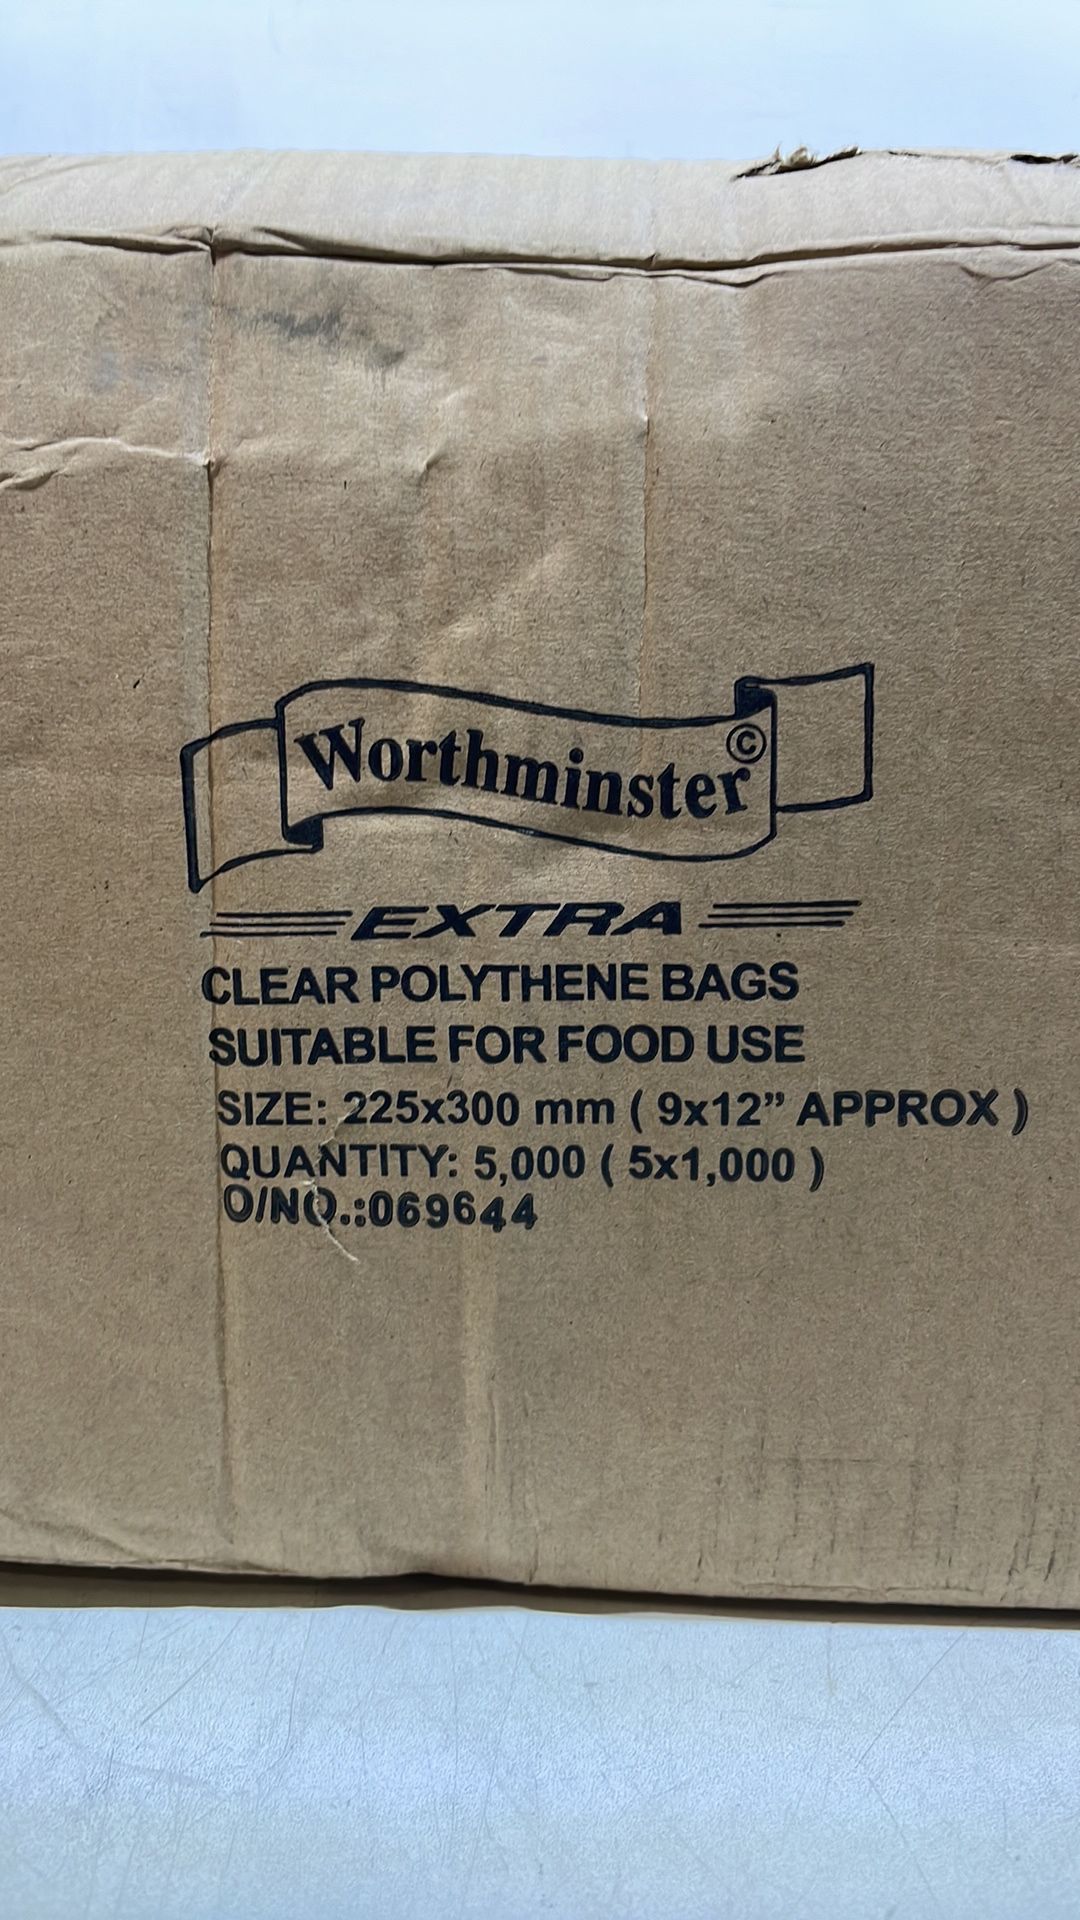 2 x Boxes of 225mm x 300mm Clear Polythene Bags | Qty 5,000 per Box | Suitable For Food Use - Image 2 of 2